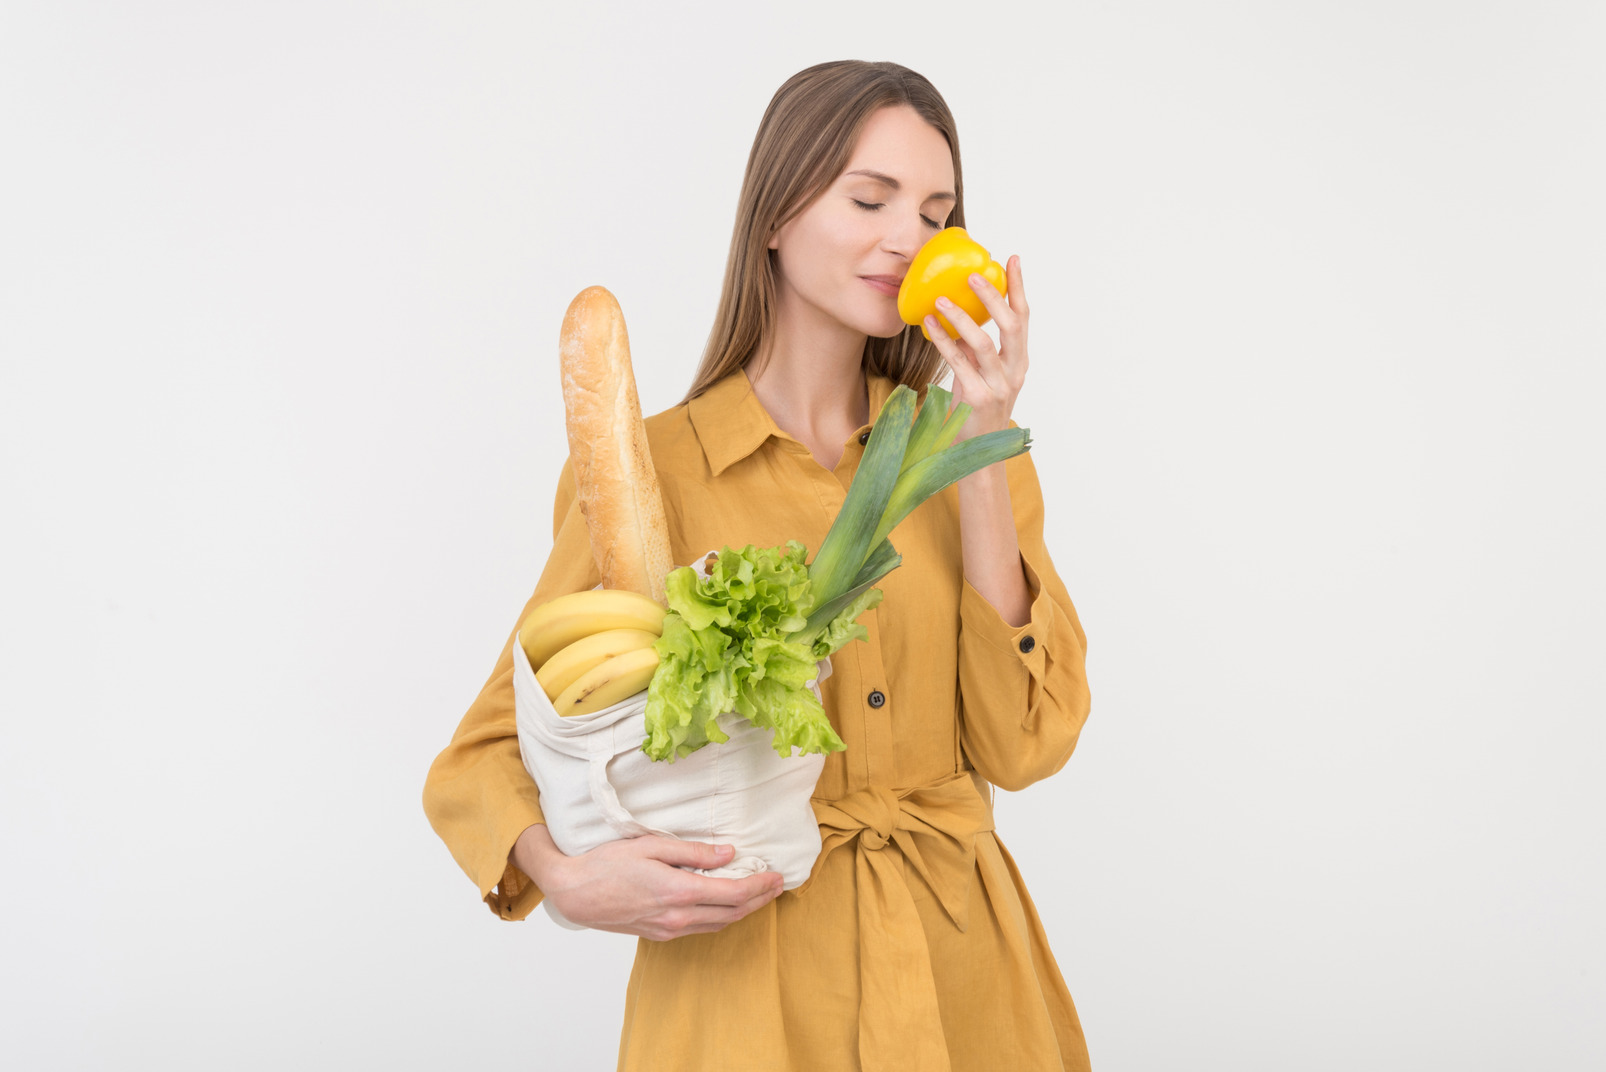 Young woman holding shopping bag and smelling a pepper out of it